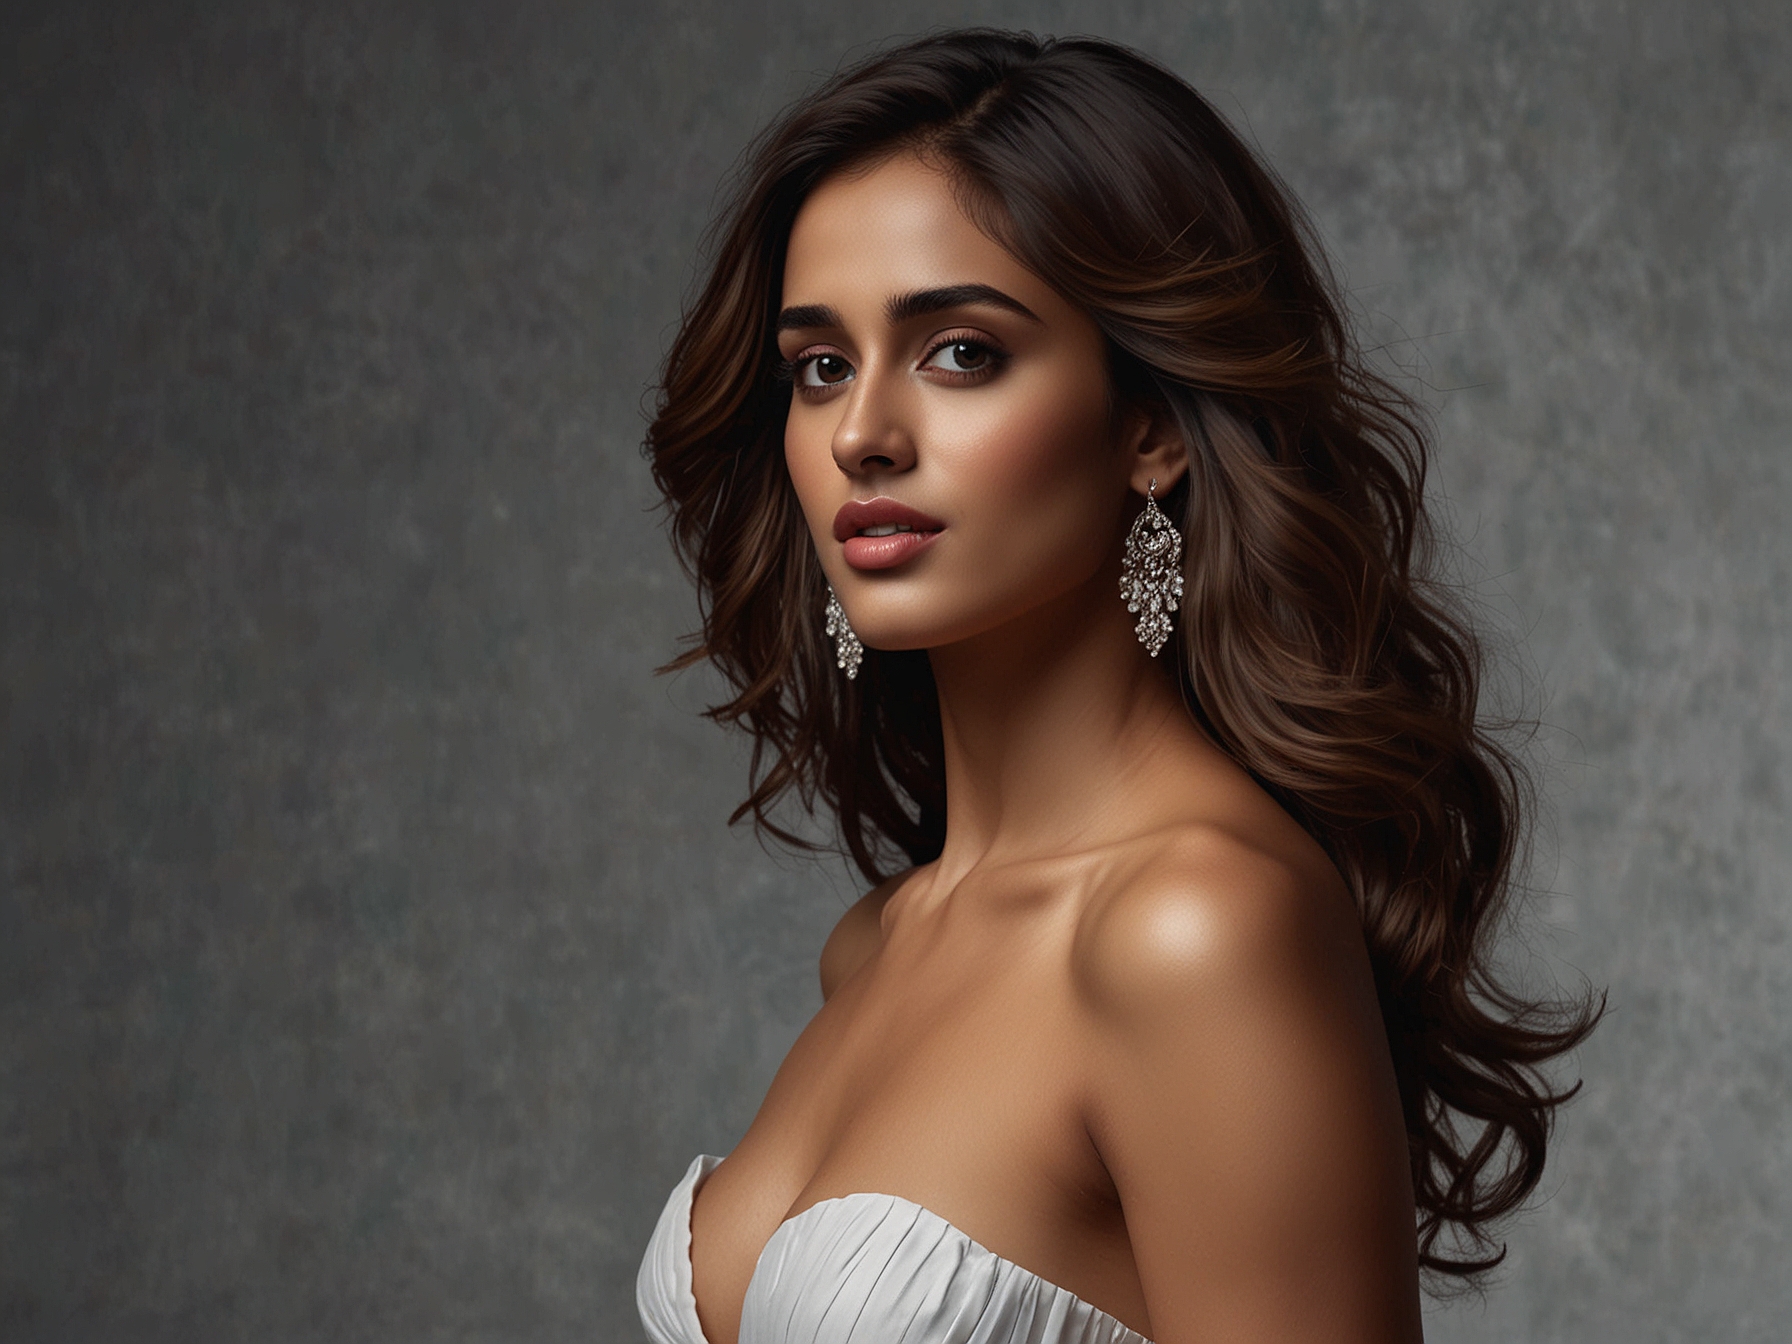 With loose waves cascading down her shoulders and natural yet striking makeup, Disha Patani radiates elegance and sensuality in her latest photoshoot, captivating her fans.